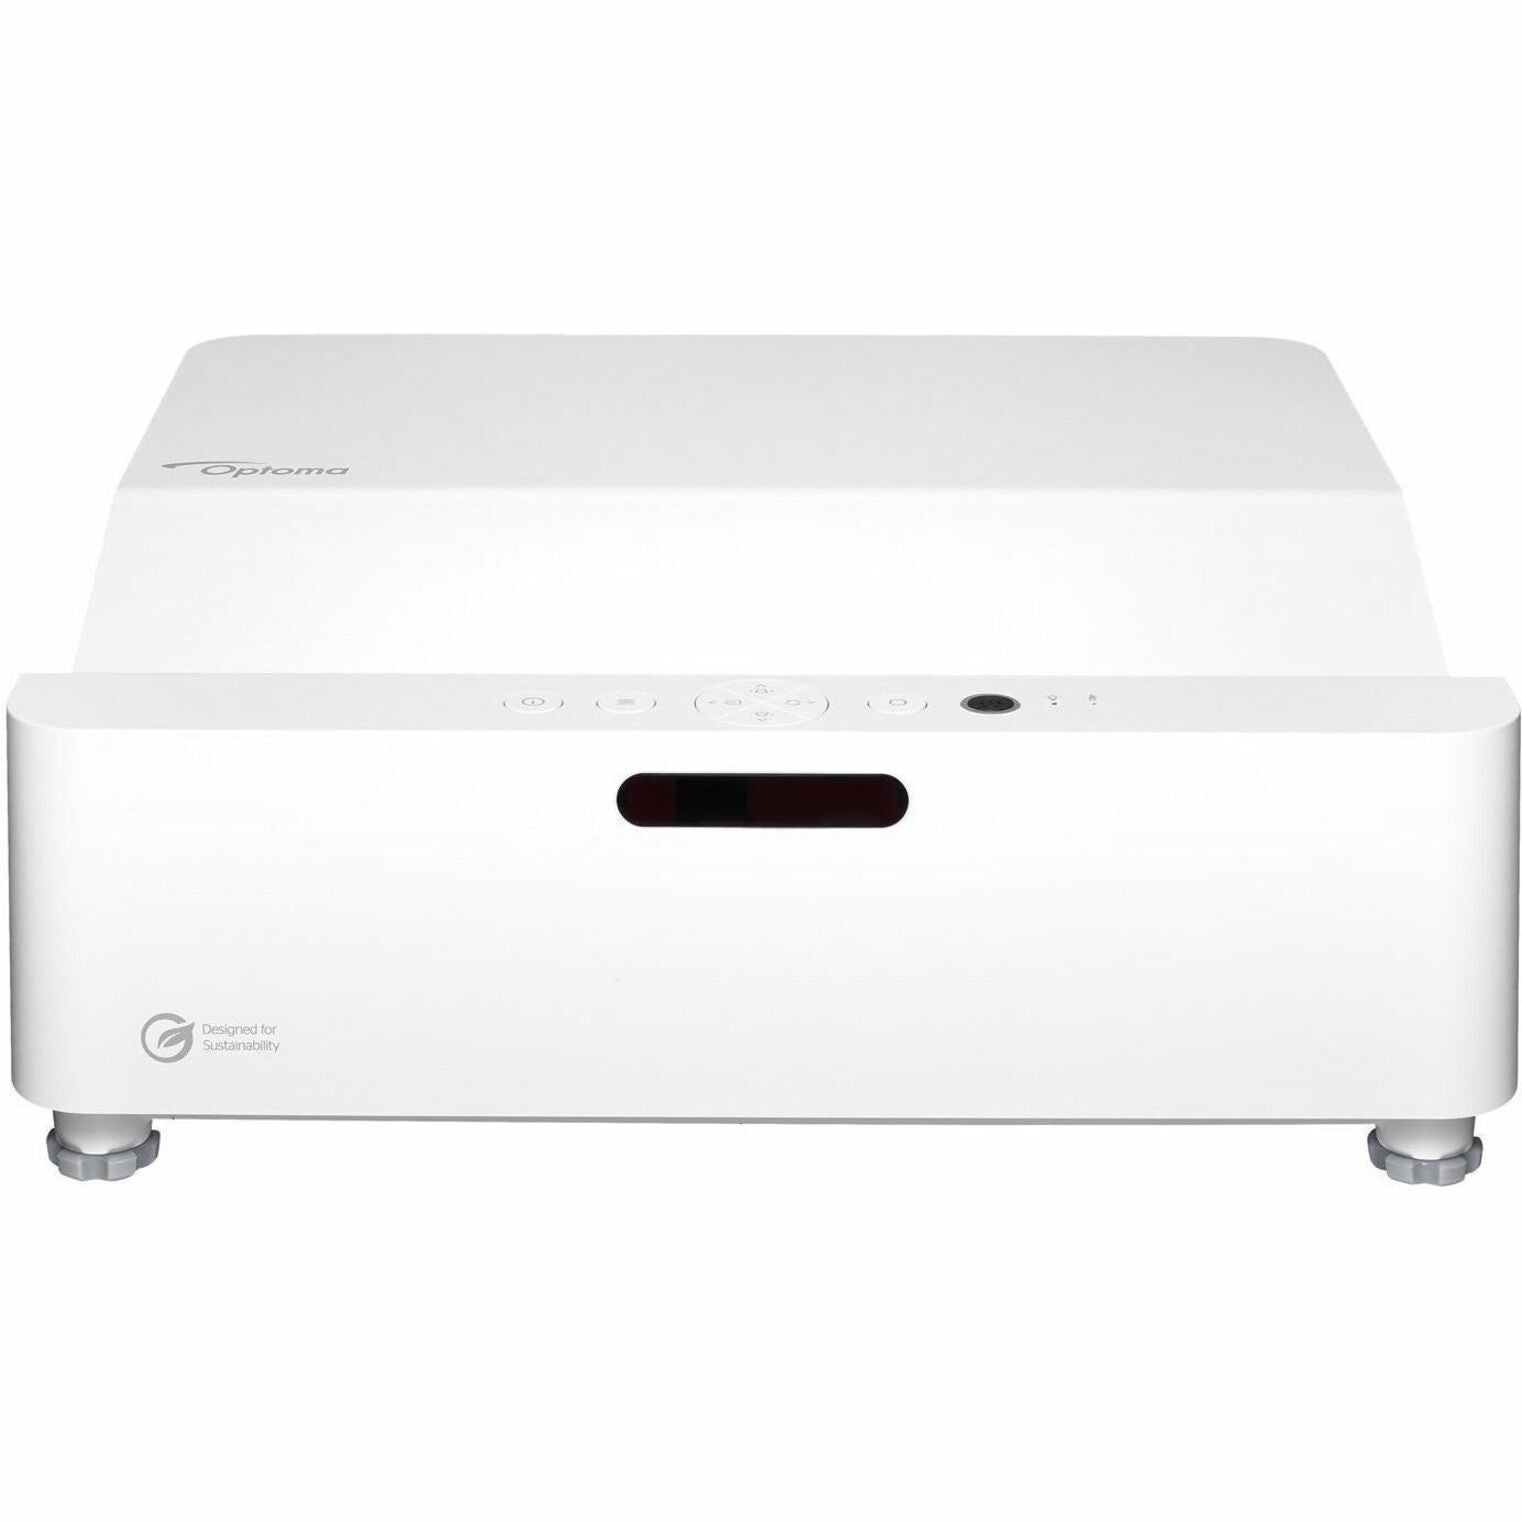 Optoma GT3500HDR Full HD 1080p DuraCore Eco-Friendly Ultra Short Throw Laser Home Projector